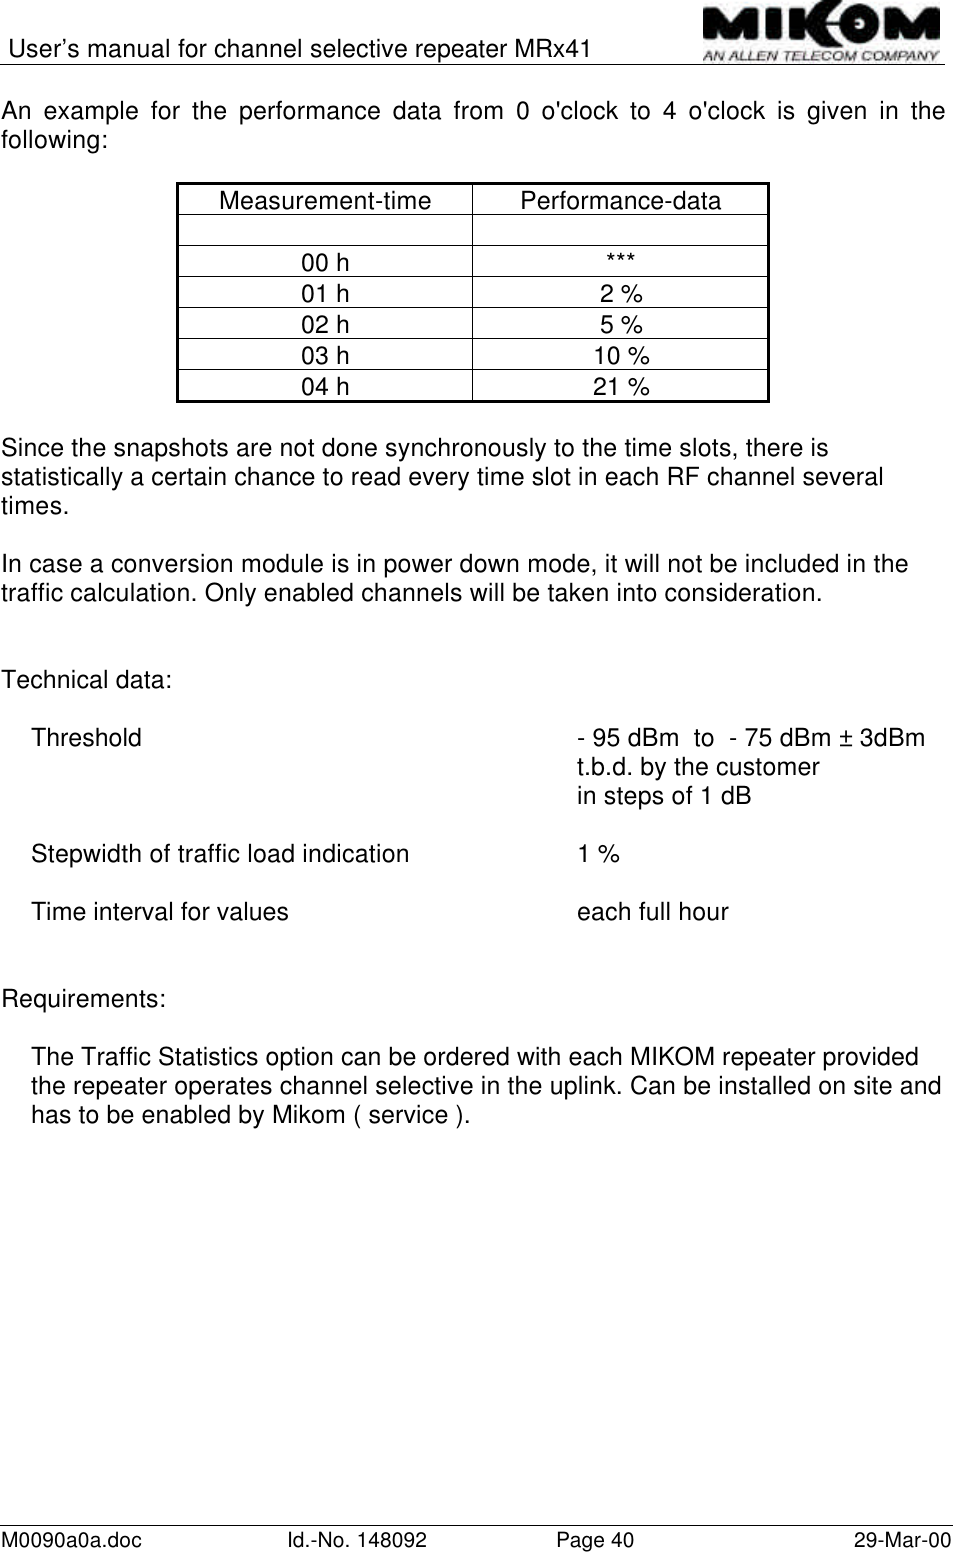 User’s manual for channel selective repeater MRx41M0090a0a.doc Id.-No. 148092 Page 40 29-Mar-00An example for the performance data from 0 o&apos;clock to 4 o&apos;clock is given in thefollowing:Measurement-time Performance-data00 h ***01 h 2 %02 h 5 %03 h 10 %04 h 21 %Since the snapshots are not done synchronously to the time slots, there isstatistically a certain chance to read every time slot in each RF channel severaltimes.In case a conversion module is in power down mode, it will not be included in thetraffic calculation. Only enabled channels will be taken into consideration.Technical data:Threshold - 95 dBm  to  - 75 dBm ± 3dBmt.b.d. by the customerin steps of 1 dBStepwidth of traffic load indication 1 %Time interval for values each full hourRequirements:The Traffic Statistics option can be ordered with each MIKOM repeater providedthe repeater operates channel selective in the uplink. Can be installed on site andhas to be enabled by Mikom ( service ).